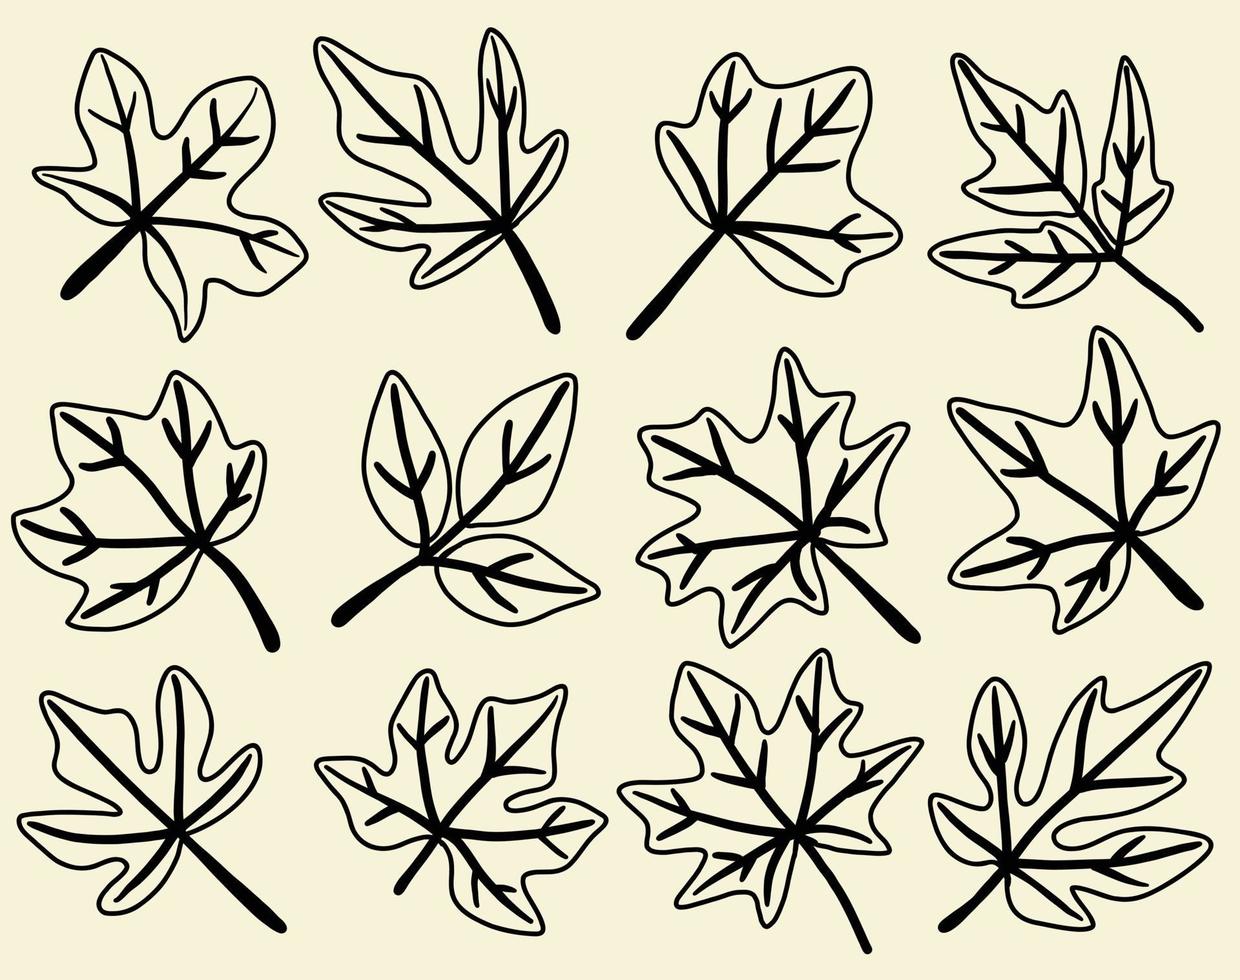 Collection of simplicity maple leaf freehand drawing flat design. vector